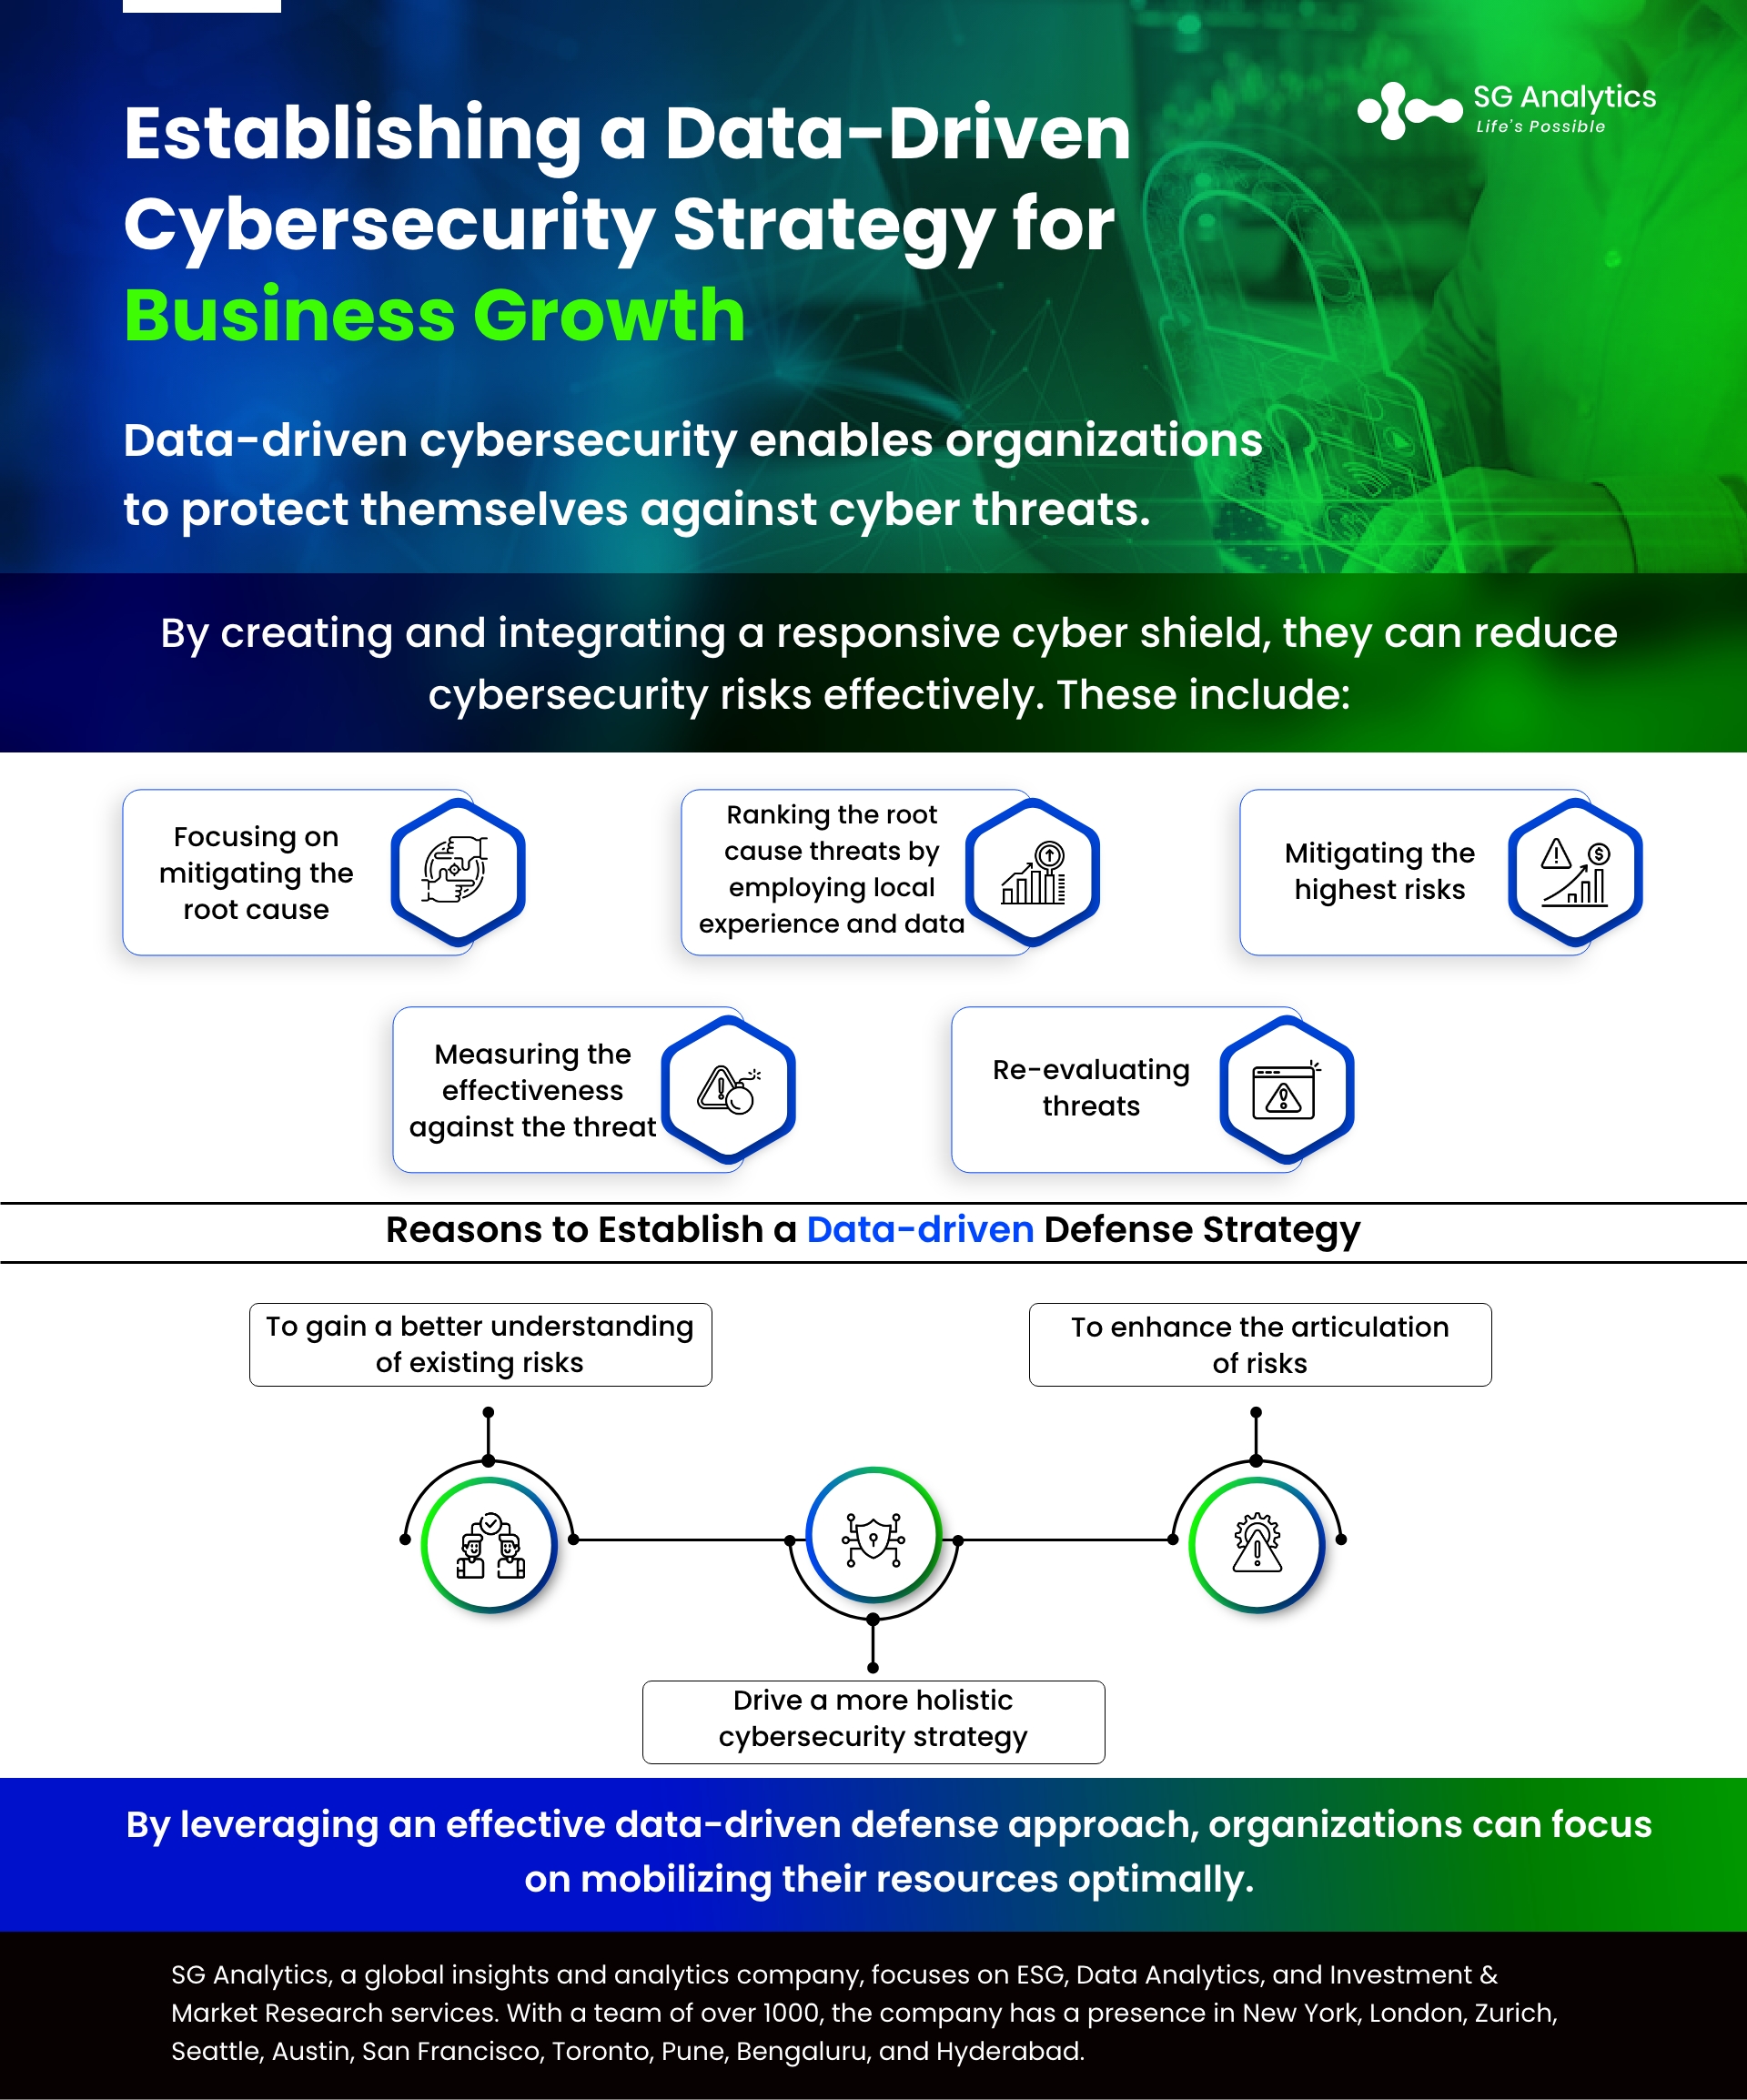 Establishing a Data-Driven Cybersecurity Strategy for Business Growth